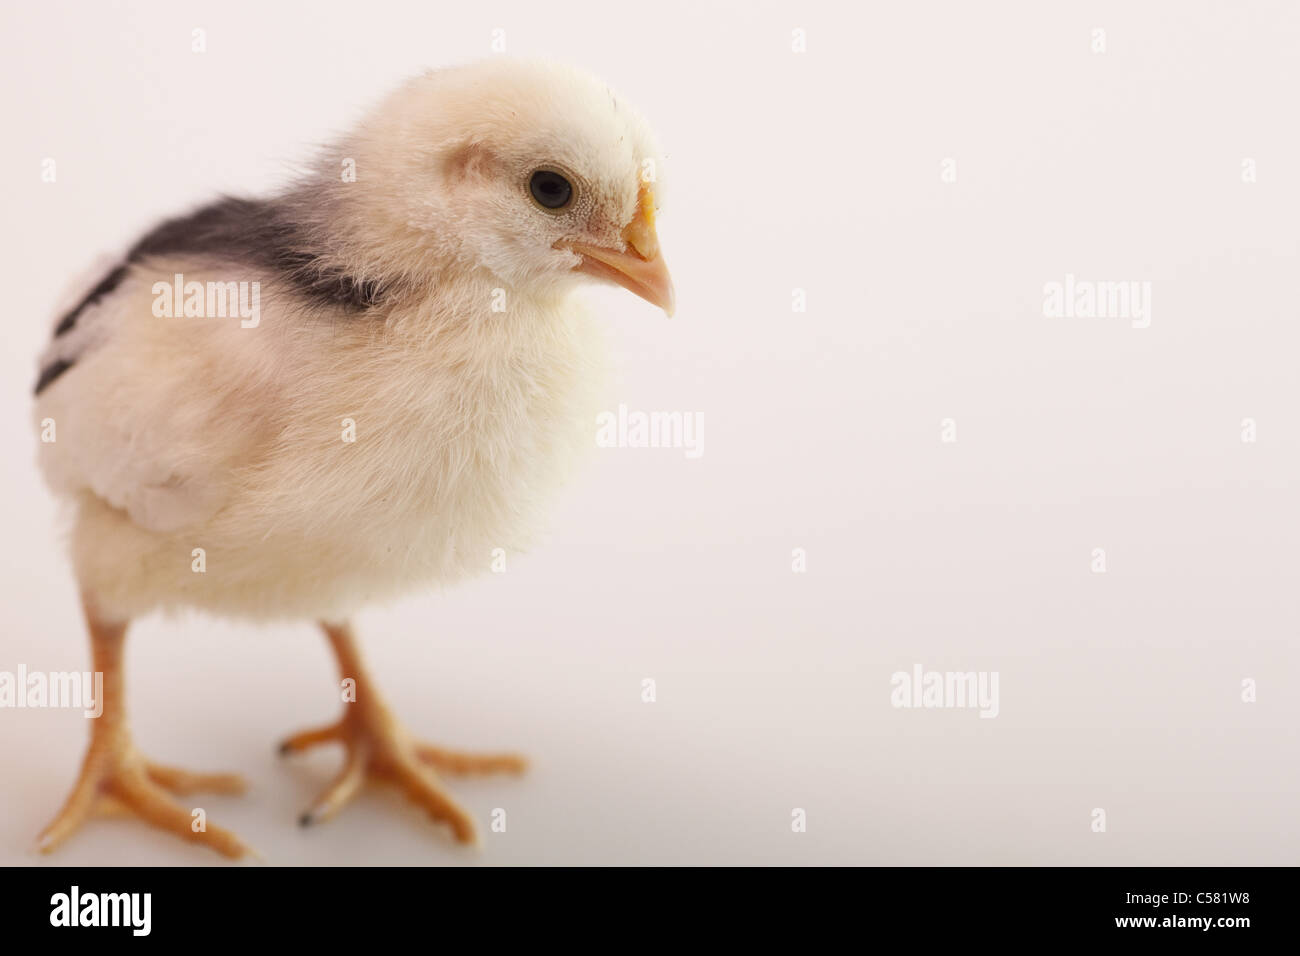 Two week old chicks Stock Photo